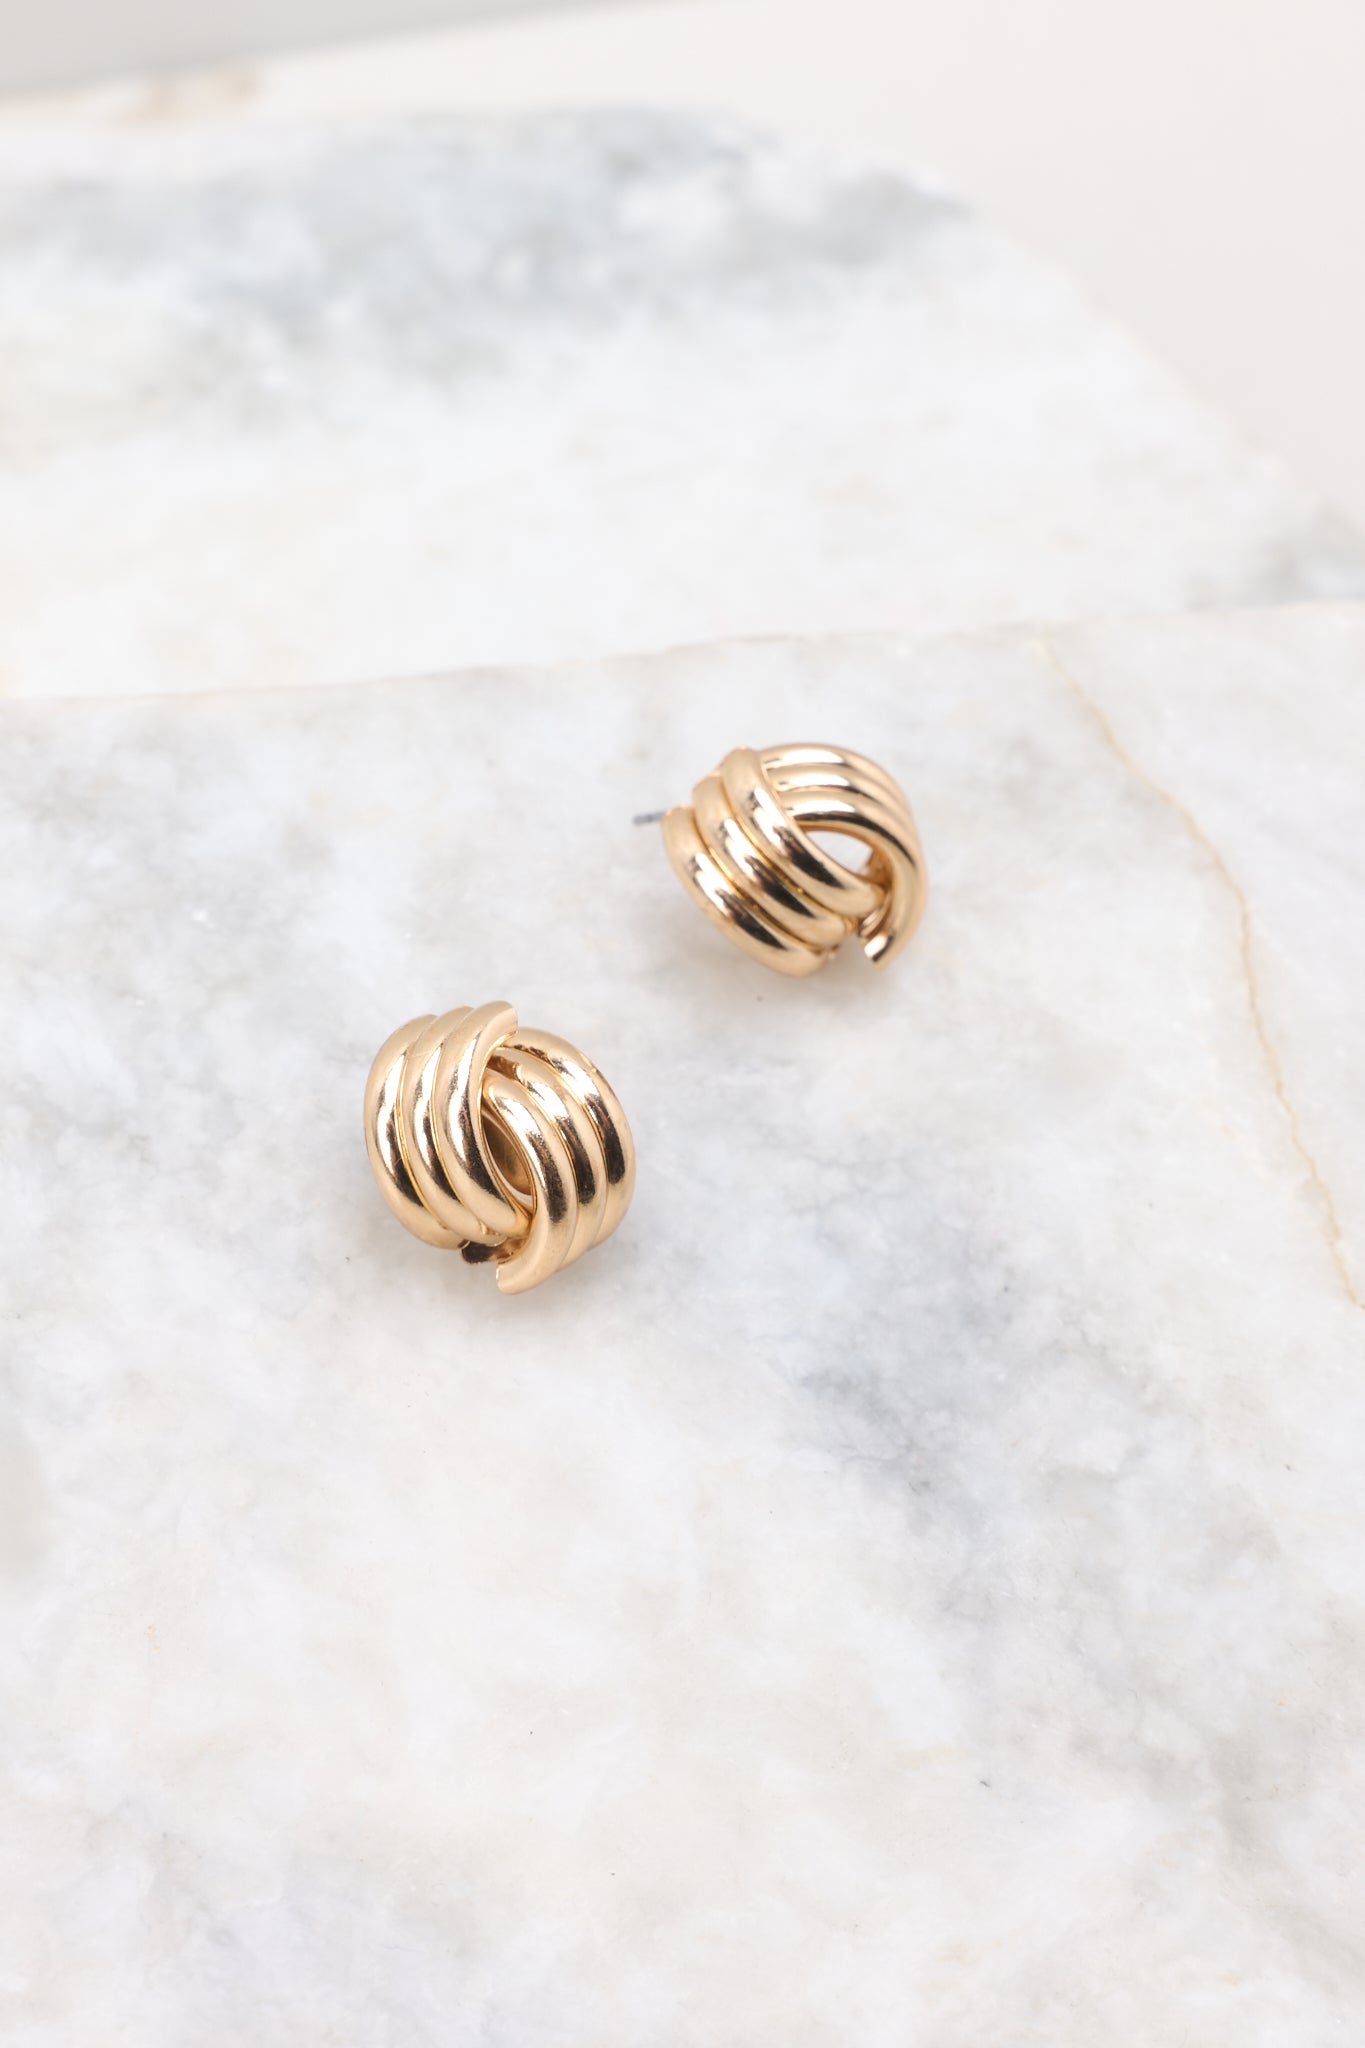 Front view of these earrings that feature a gold finish, a twisted design, and a secure post backing.